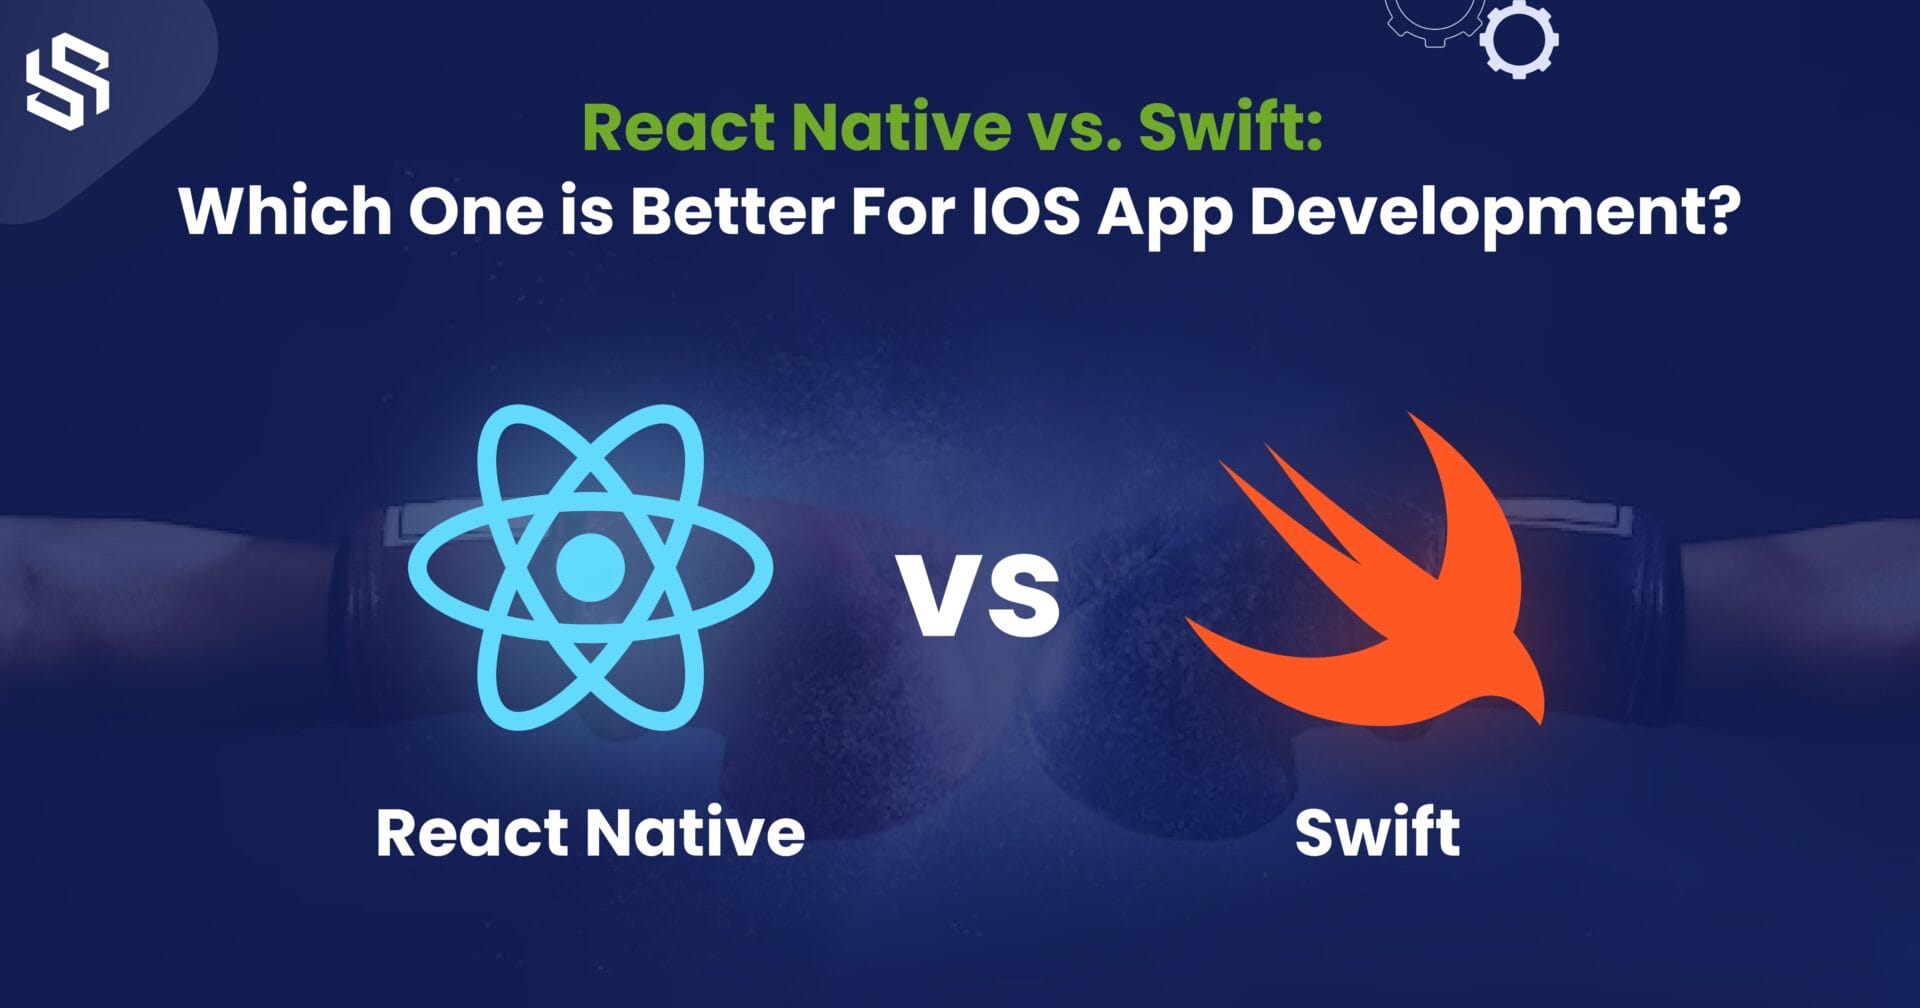 React Native vs. Swift - Which One is Better For IOS App Development